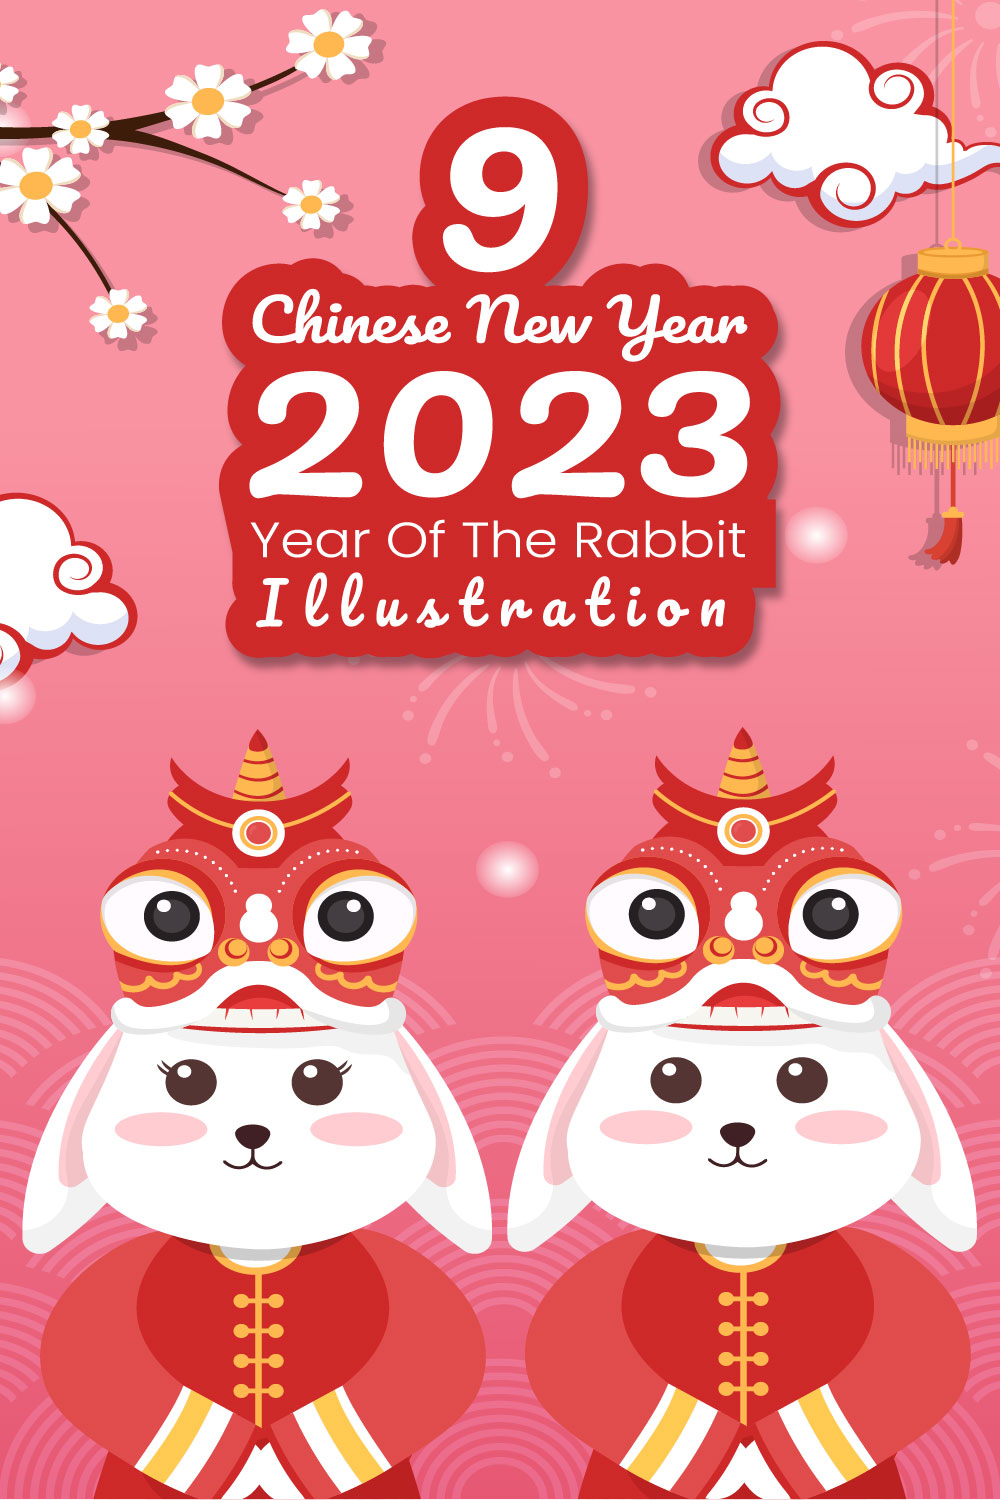 9 Chinese Lunar New Year 2023 Day Illustration pinterest image.